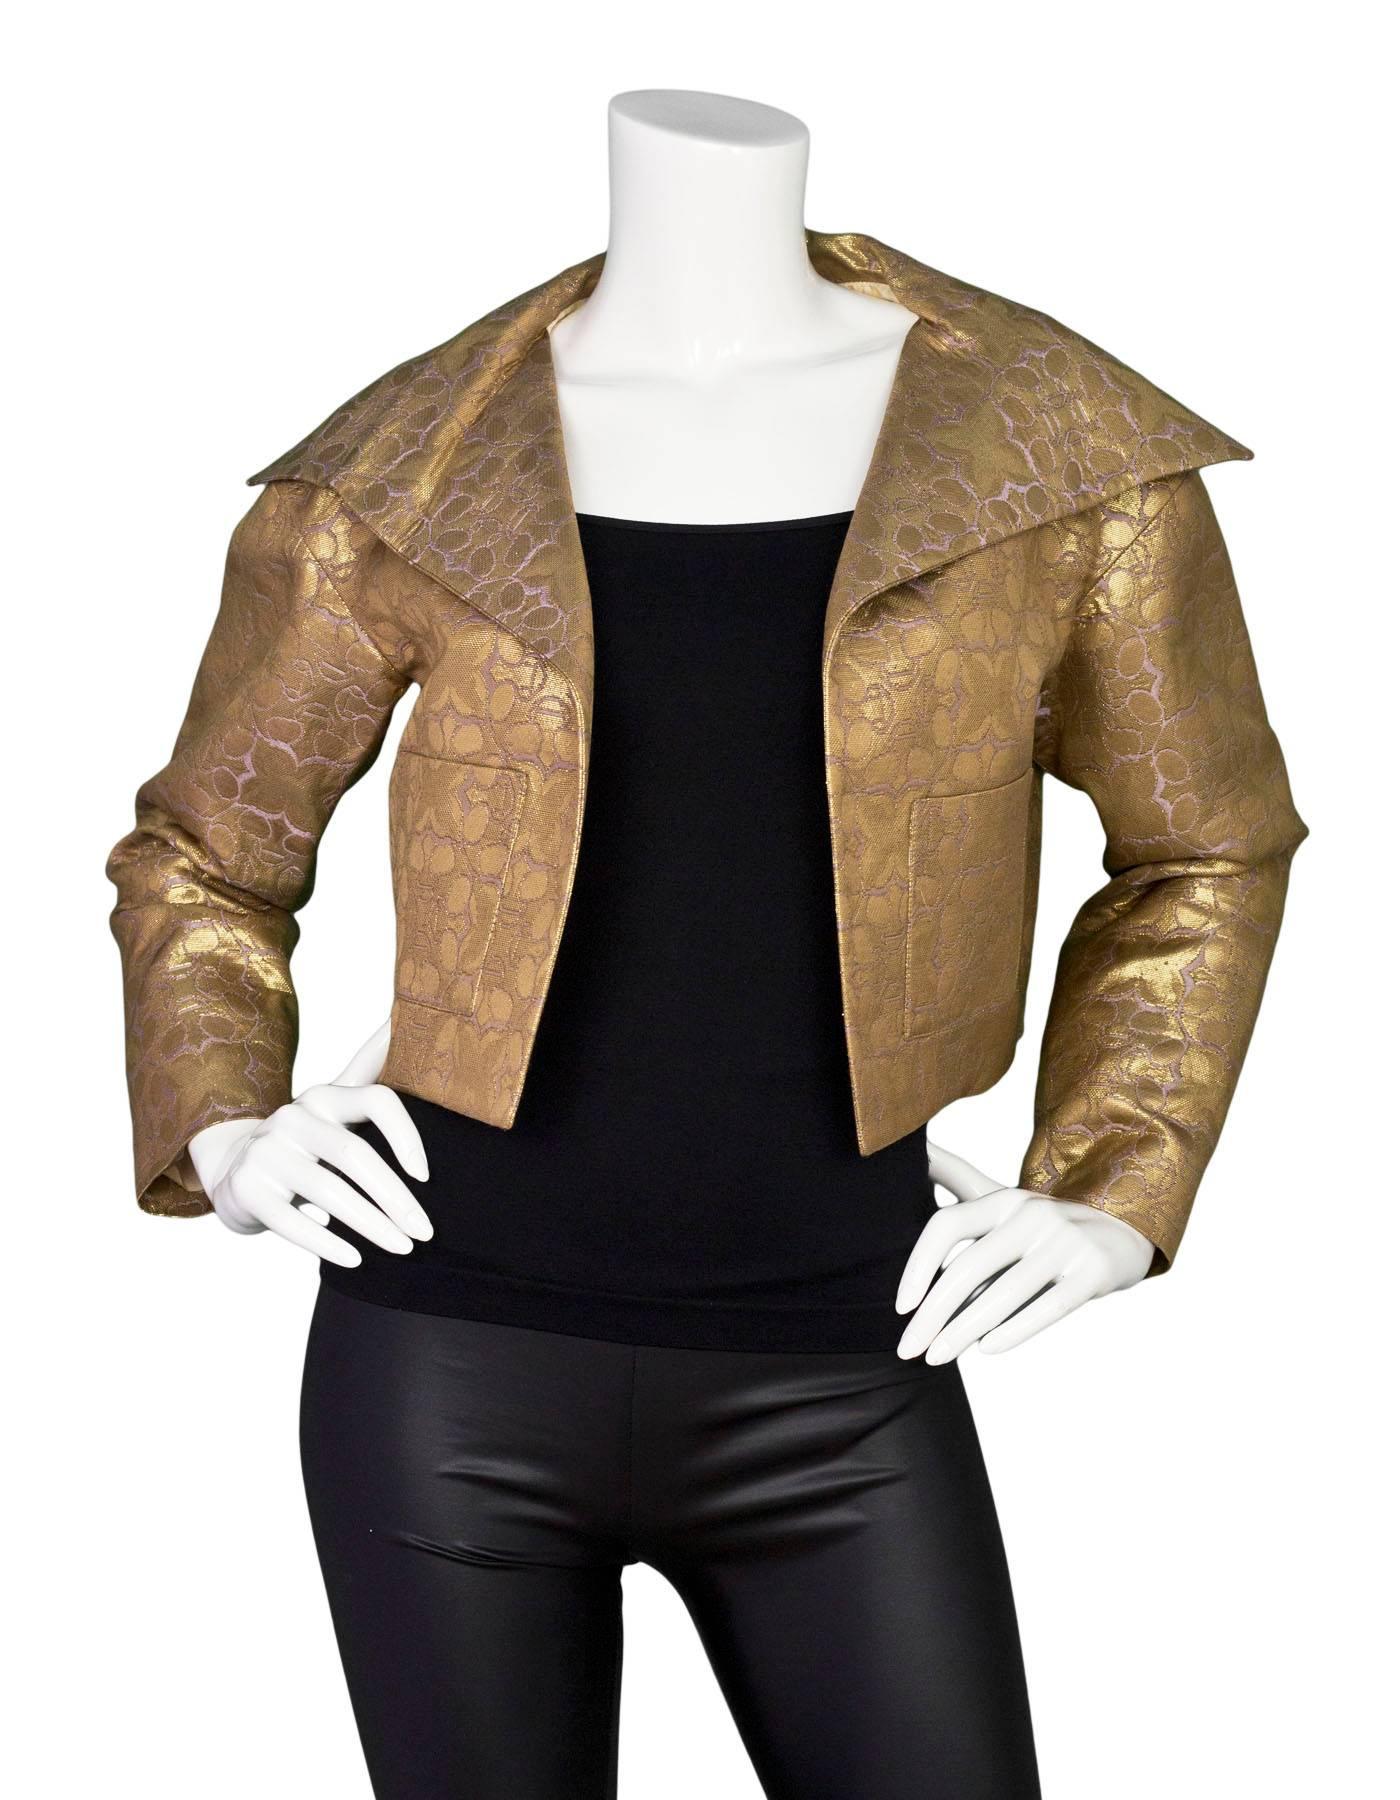 Carolina Herrera Gold Brocade Cropped Jacket

Made In: USA
Color: Gold and purple
Composition: 43% silk, 25% wool, 23% polyacrylic, 9% polyester
Lining: Champagne, silk
Closure/Opening: None- Open front
Exterior Pockets: Two patch pockets
Interior